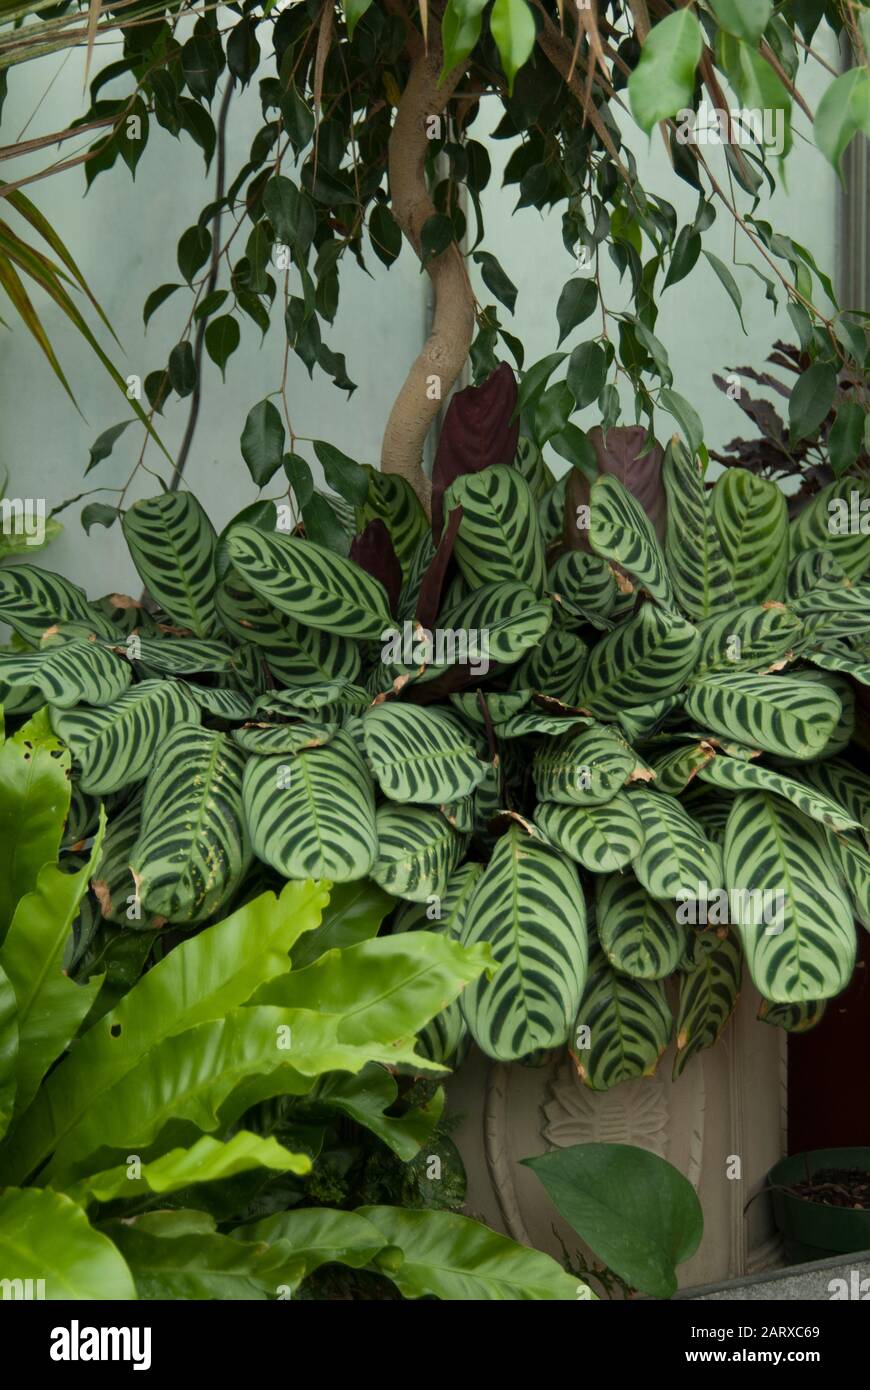 Calathea High Resolution Stock Photography and Images - Alamy